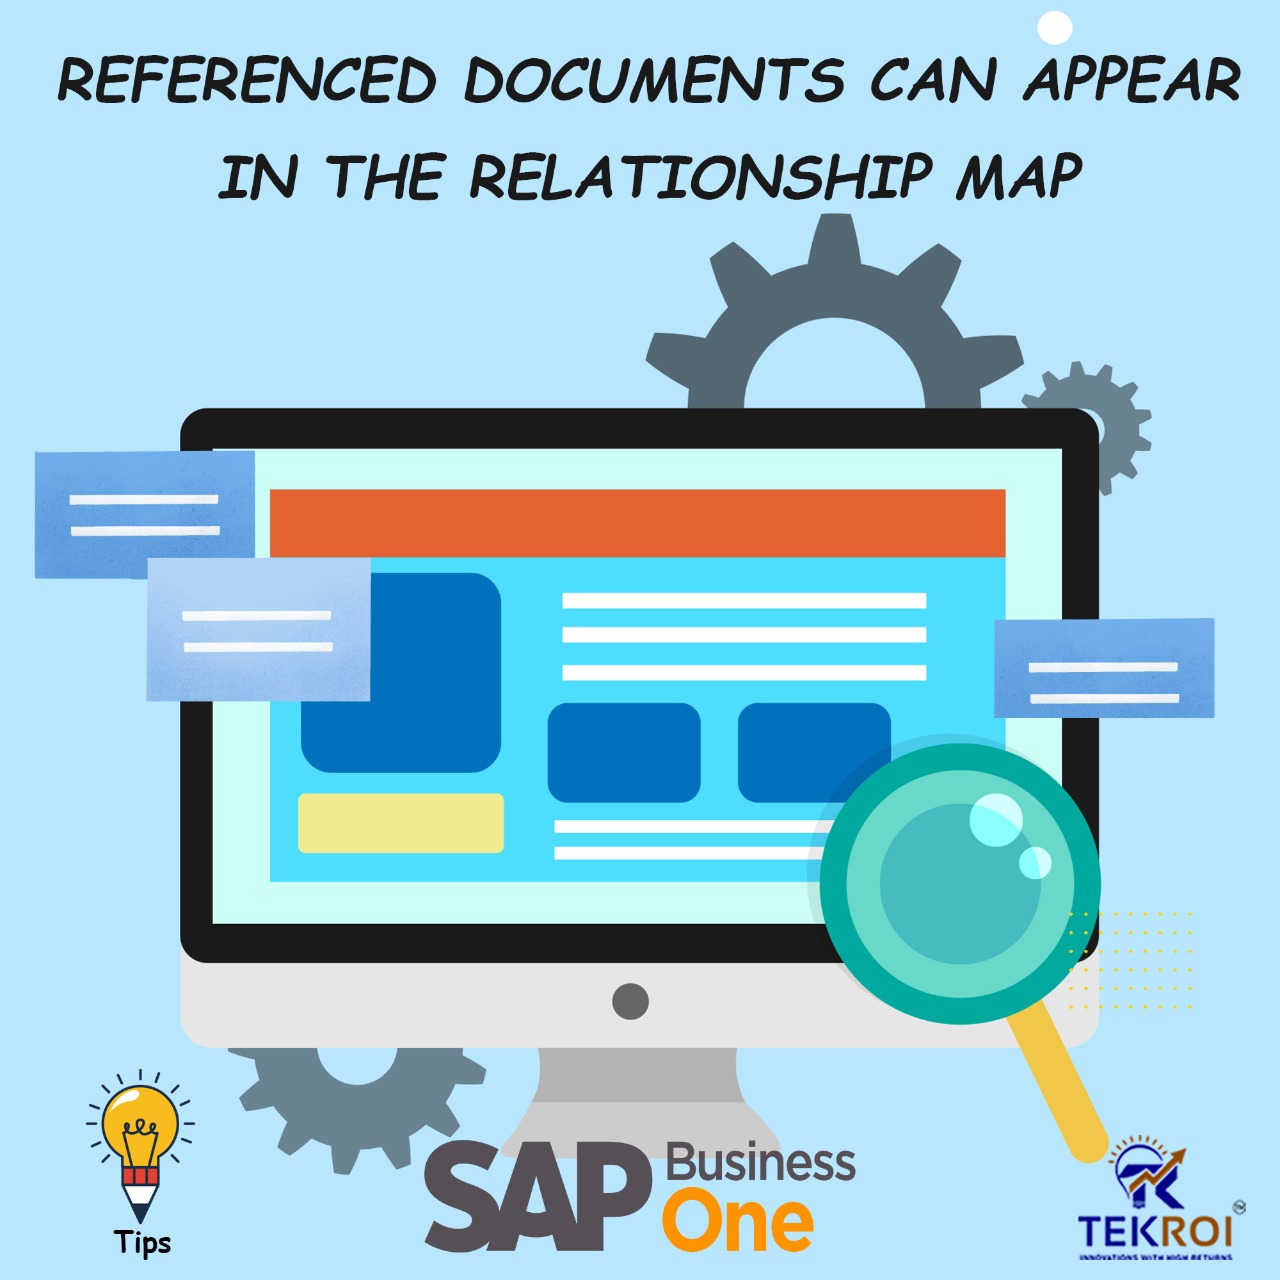 sap business one Referenced documents to appear on the relationship map.